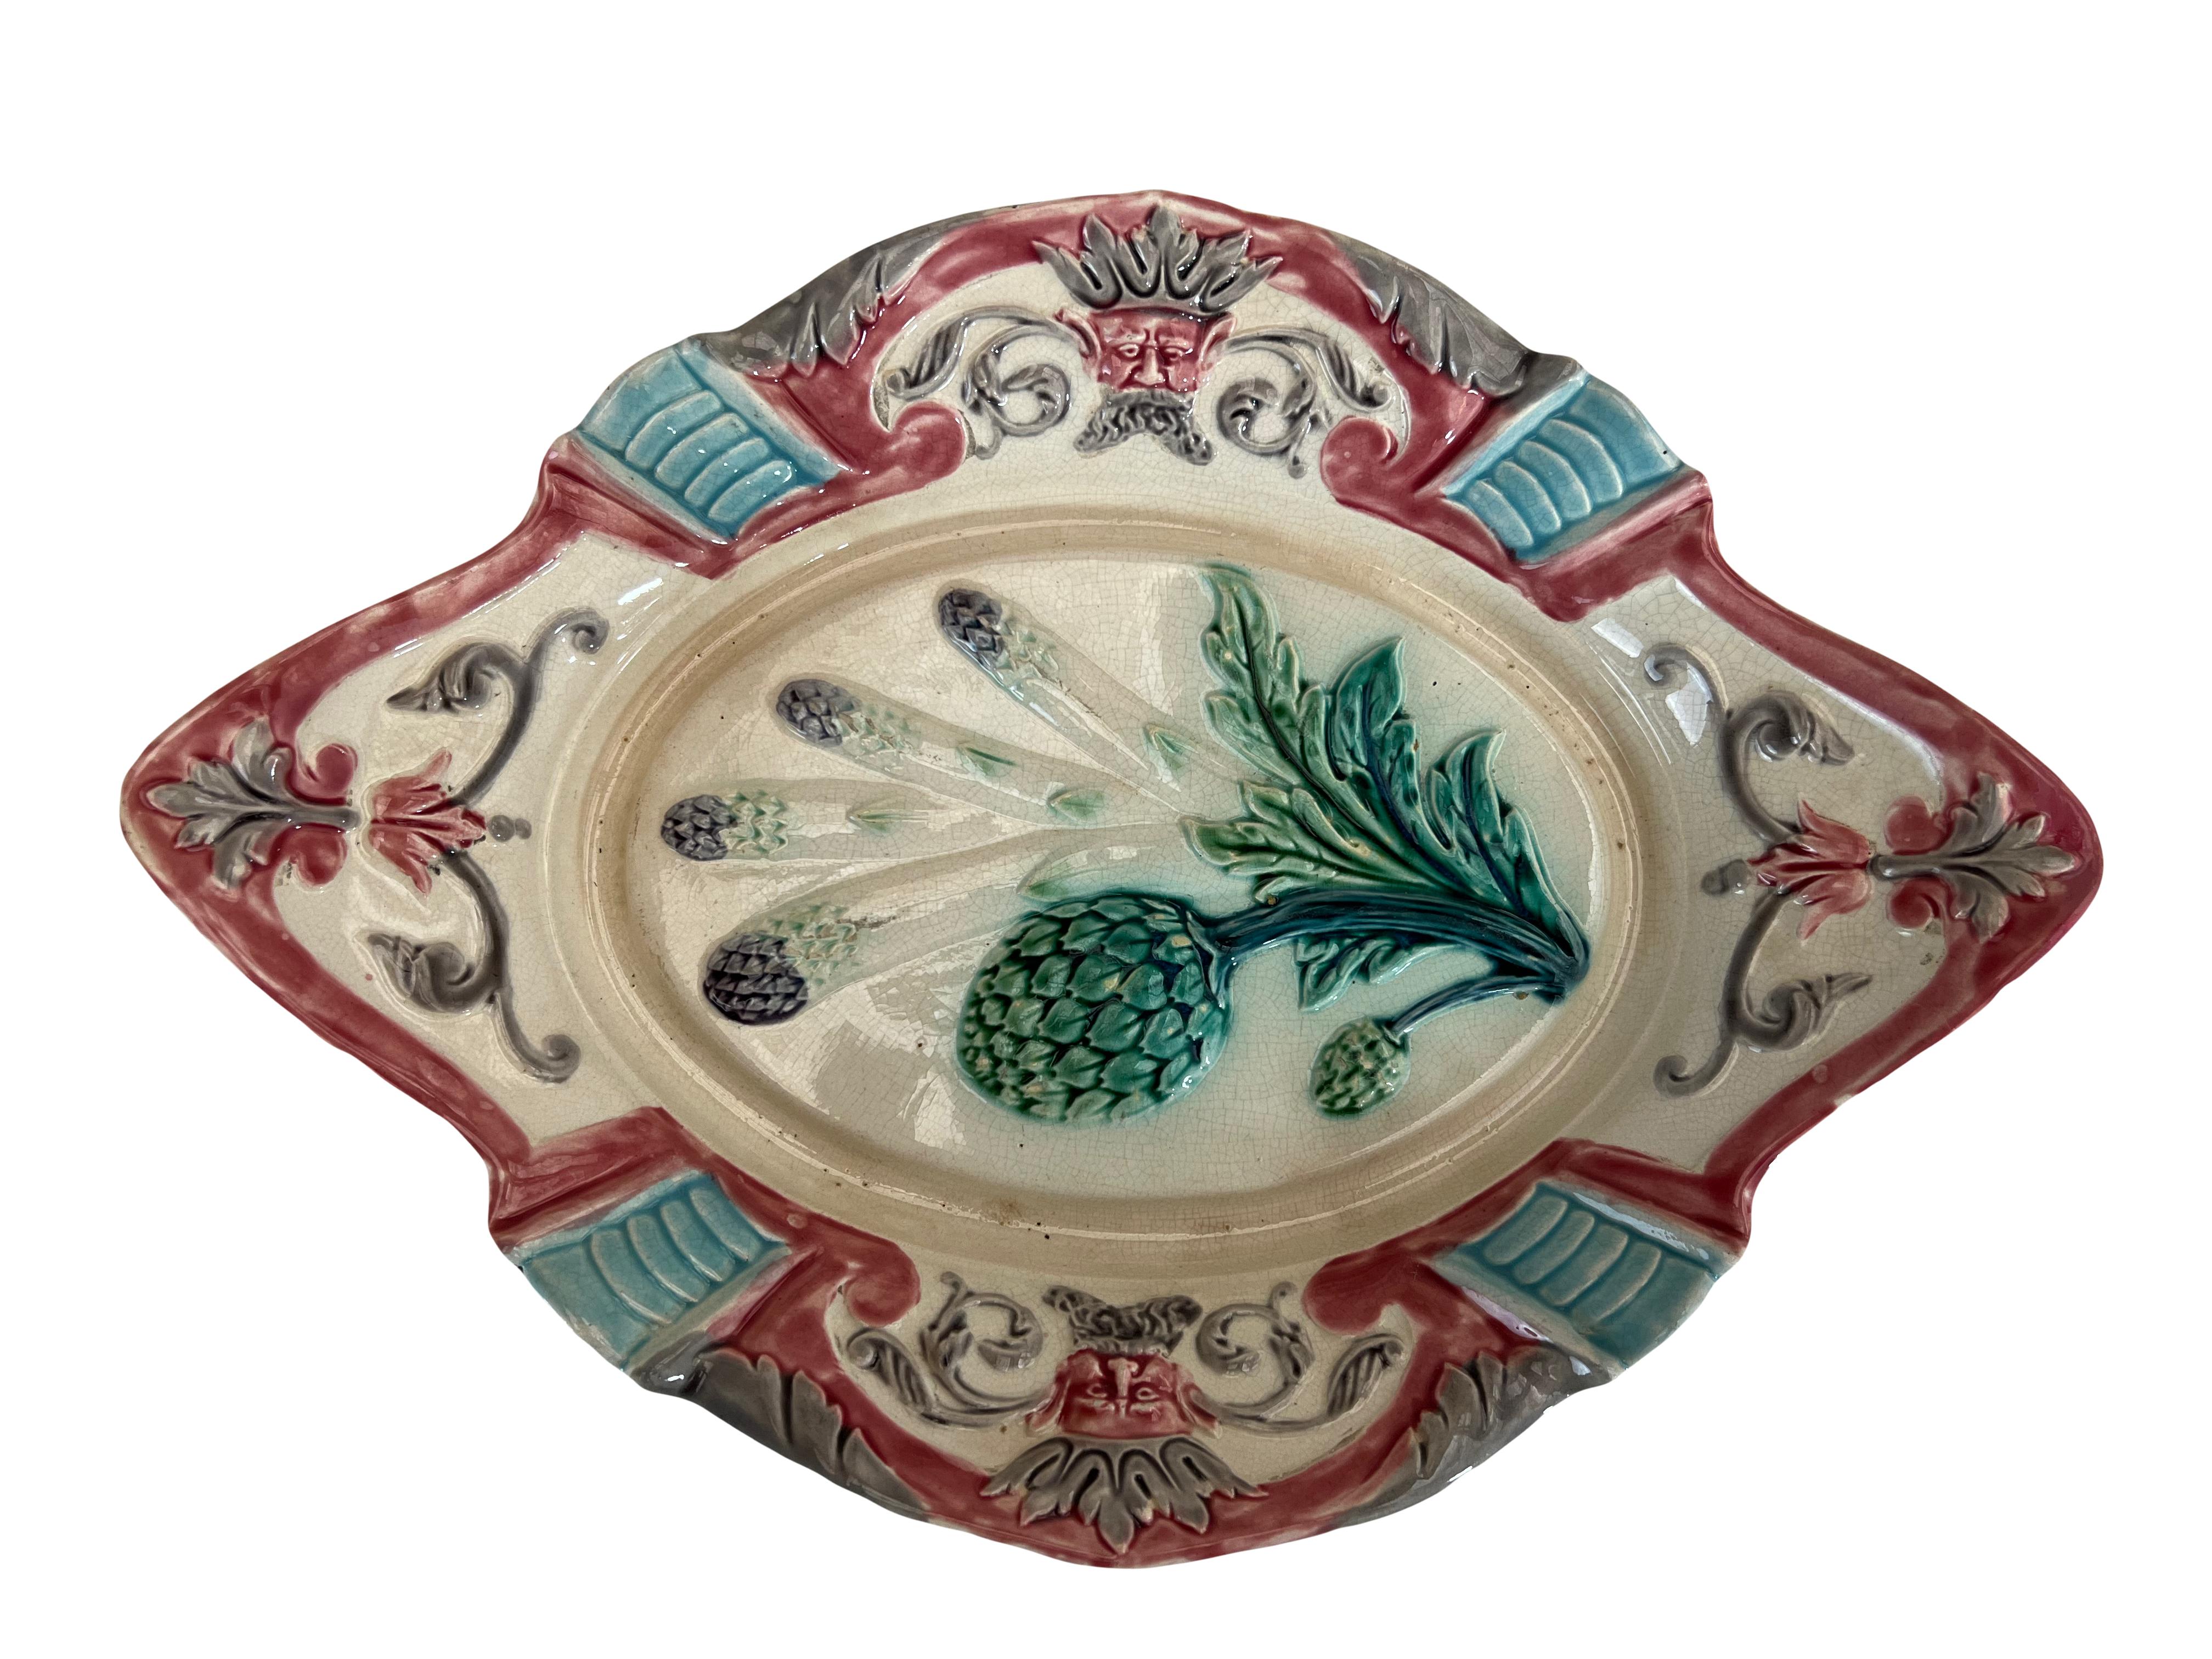 Set of 6 French majolica plates and a platter by Fives-Lille, dating back to around 1890. Designed to serve both artichokes and asparagus, these pieces feature images of both plants. Green glazing is applied on a white background, with deep purple